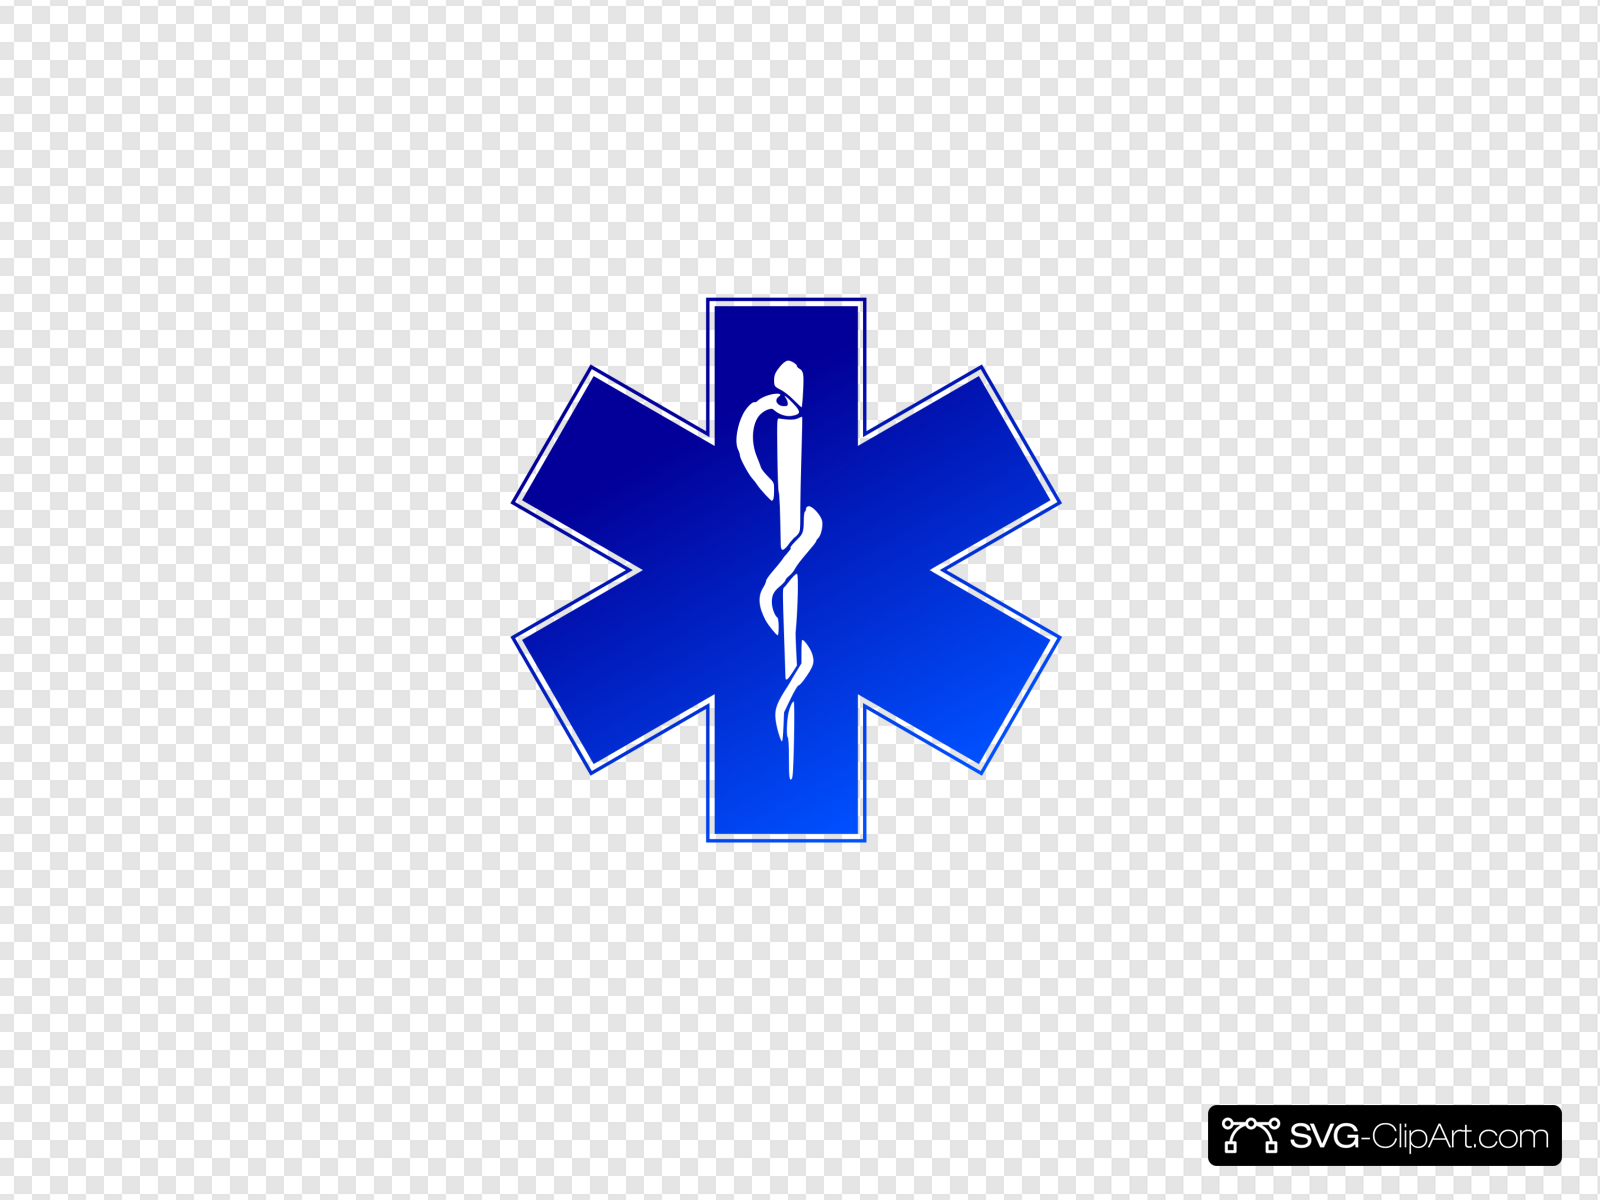 Ems Emergency Medical Service Logo Clip art, Icon and SVG.